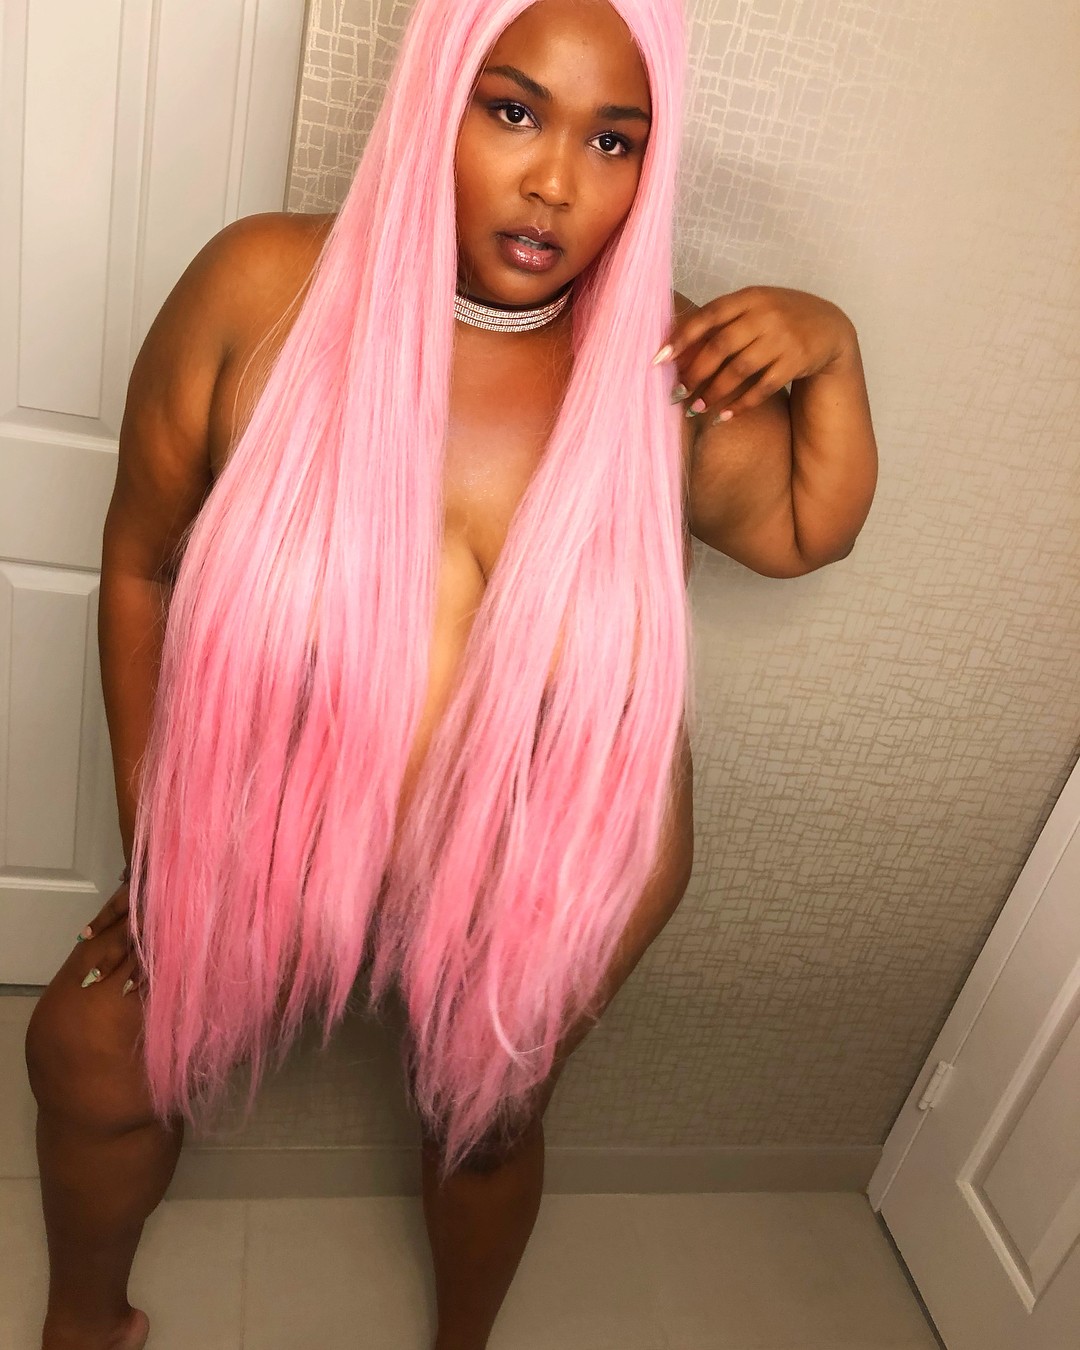 Lizzo Nude And Sexy Photos Fat Ass and Boobs (14)